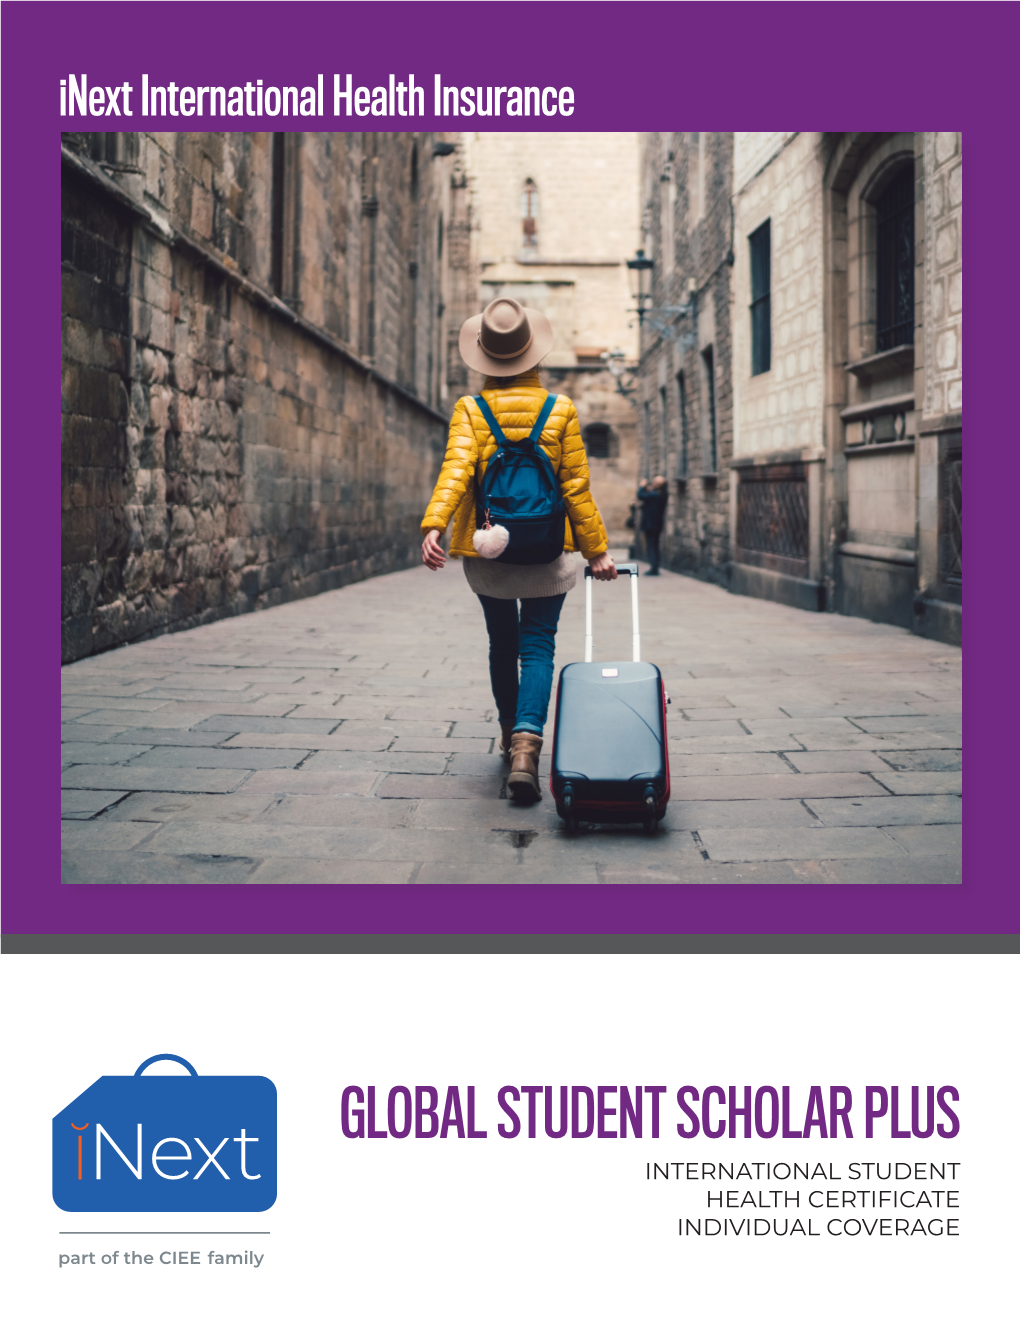 GLOBAL STUDENT SCHOLAR PLUS INTERNATIONAL STUDENT HEALTH CERTIFICATE INDIVIDUAL COVERAGE Part of the CIEE Family